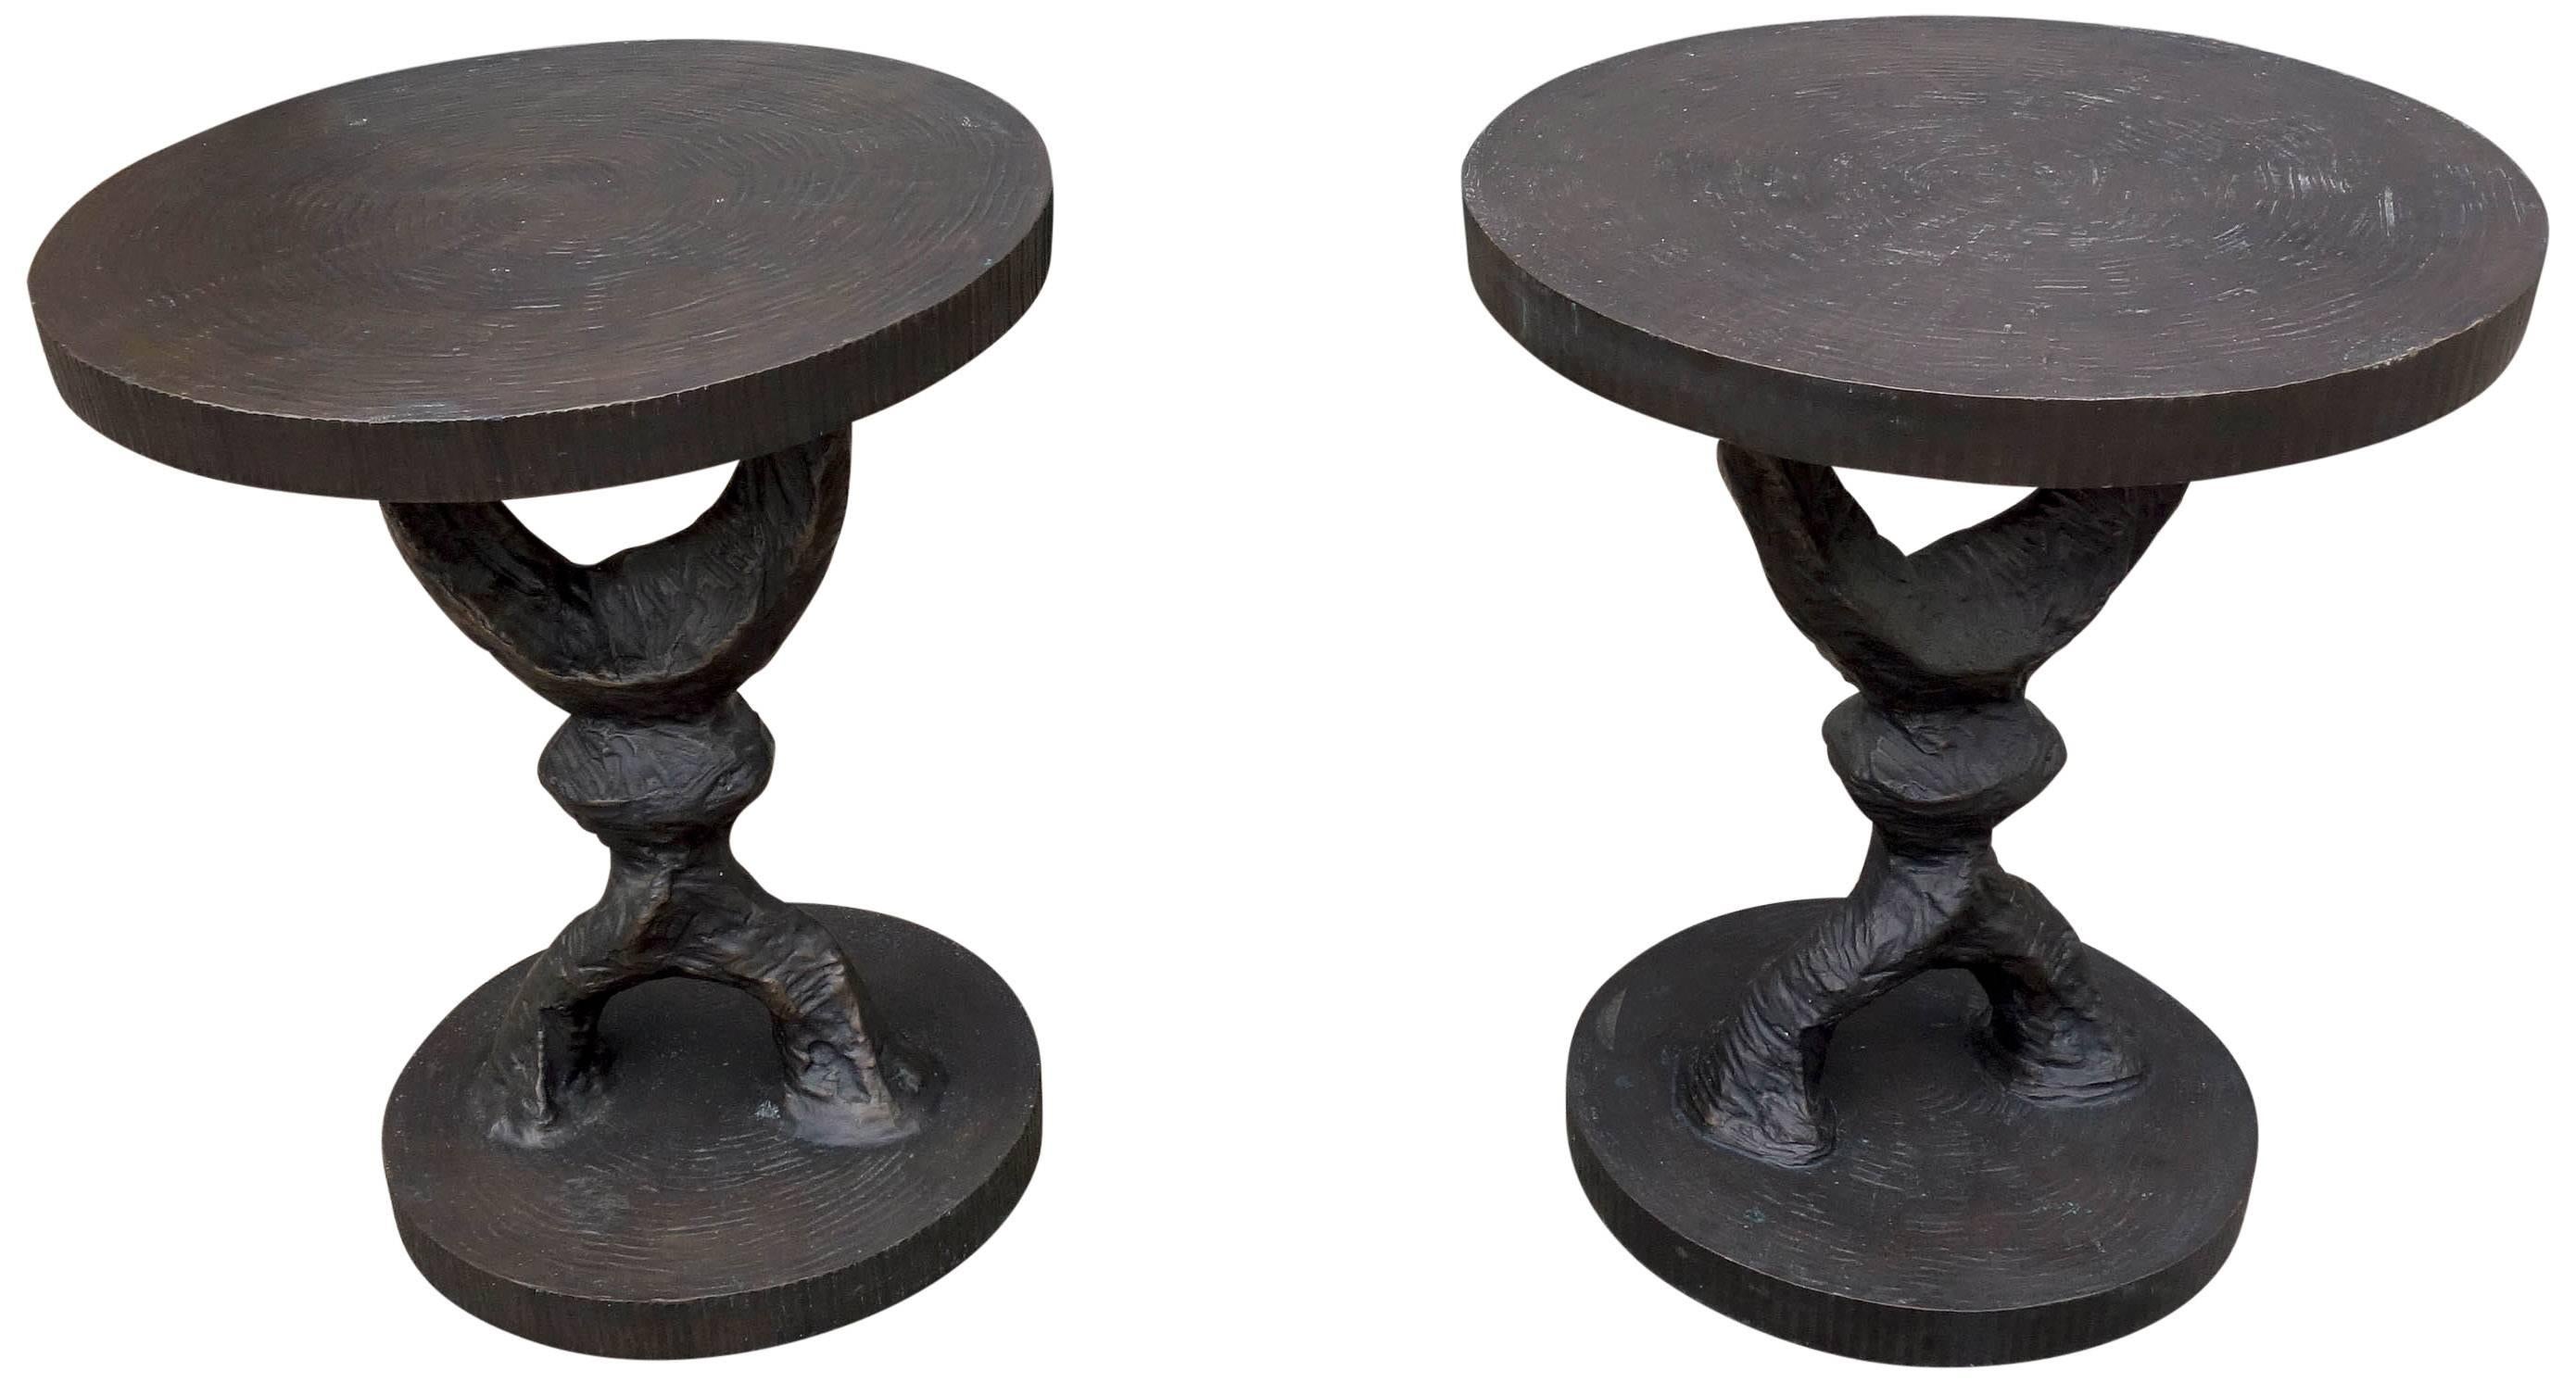 Tom Corbin designed crescent pedestal tables. Solid cast bronze with a natural patina. From midcentury to more traditional settings, these wonderfully sculpted tables exude strength and permanence that will add to any decor. You will appreciate the